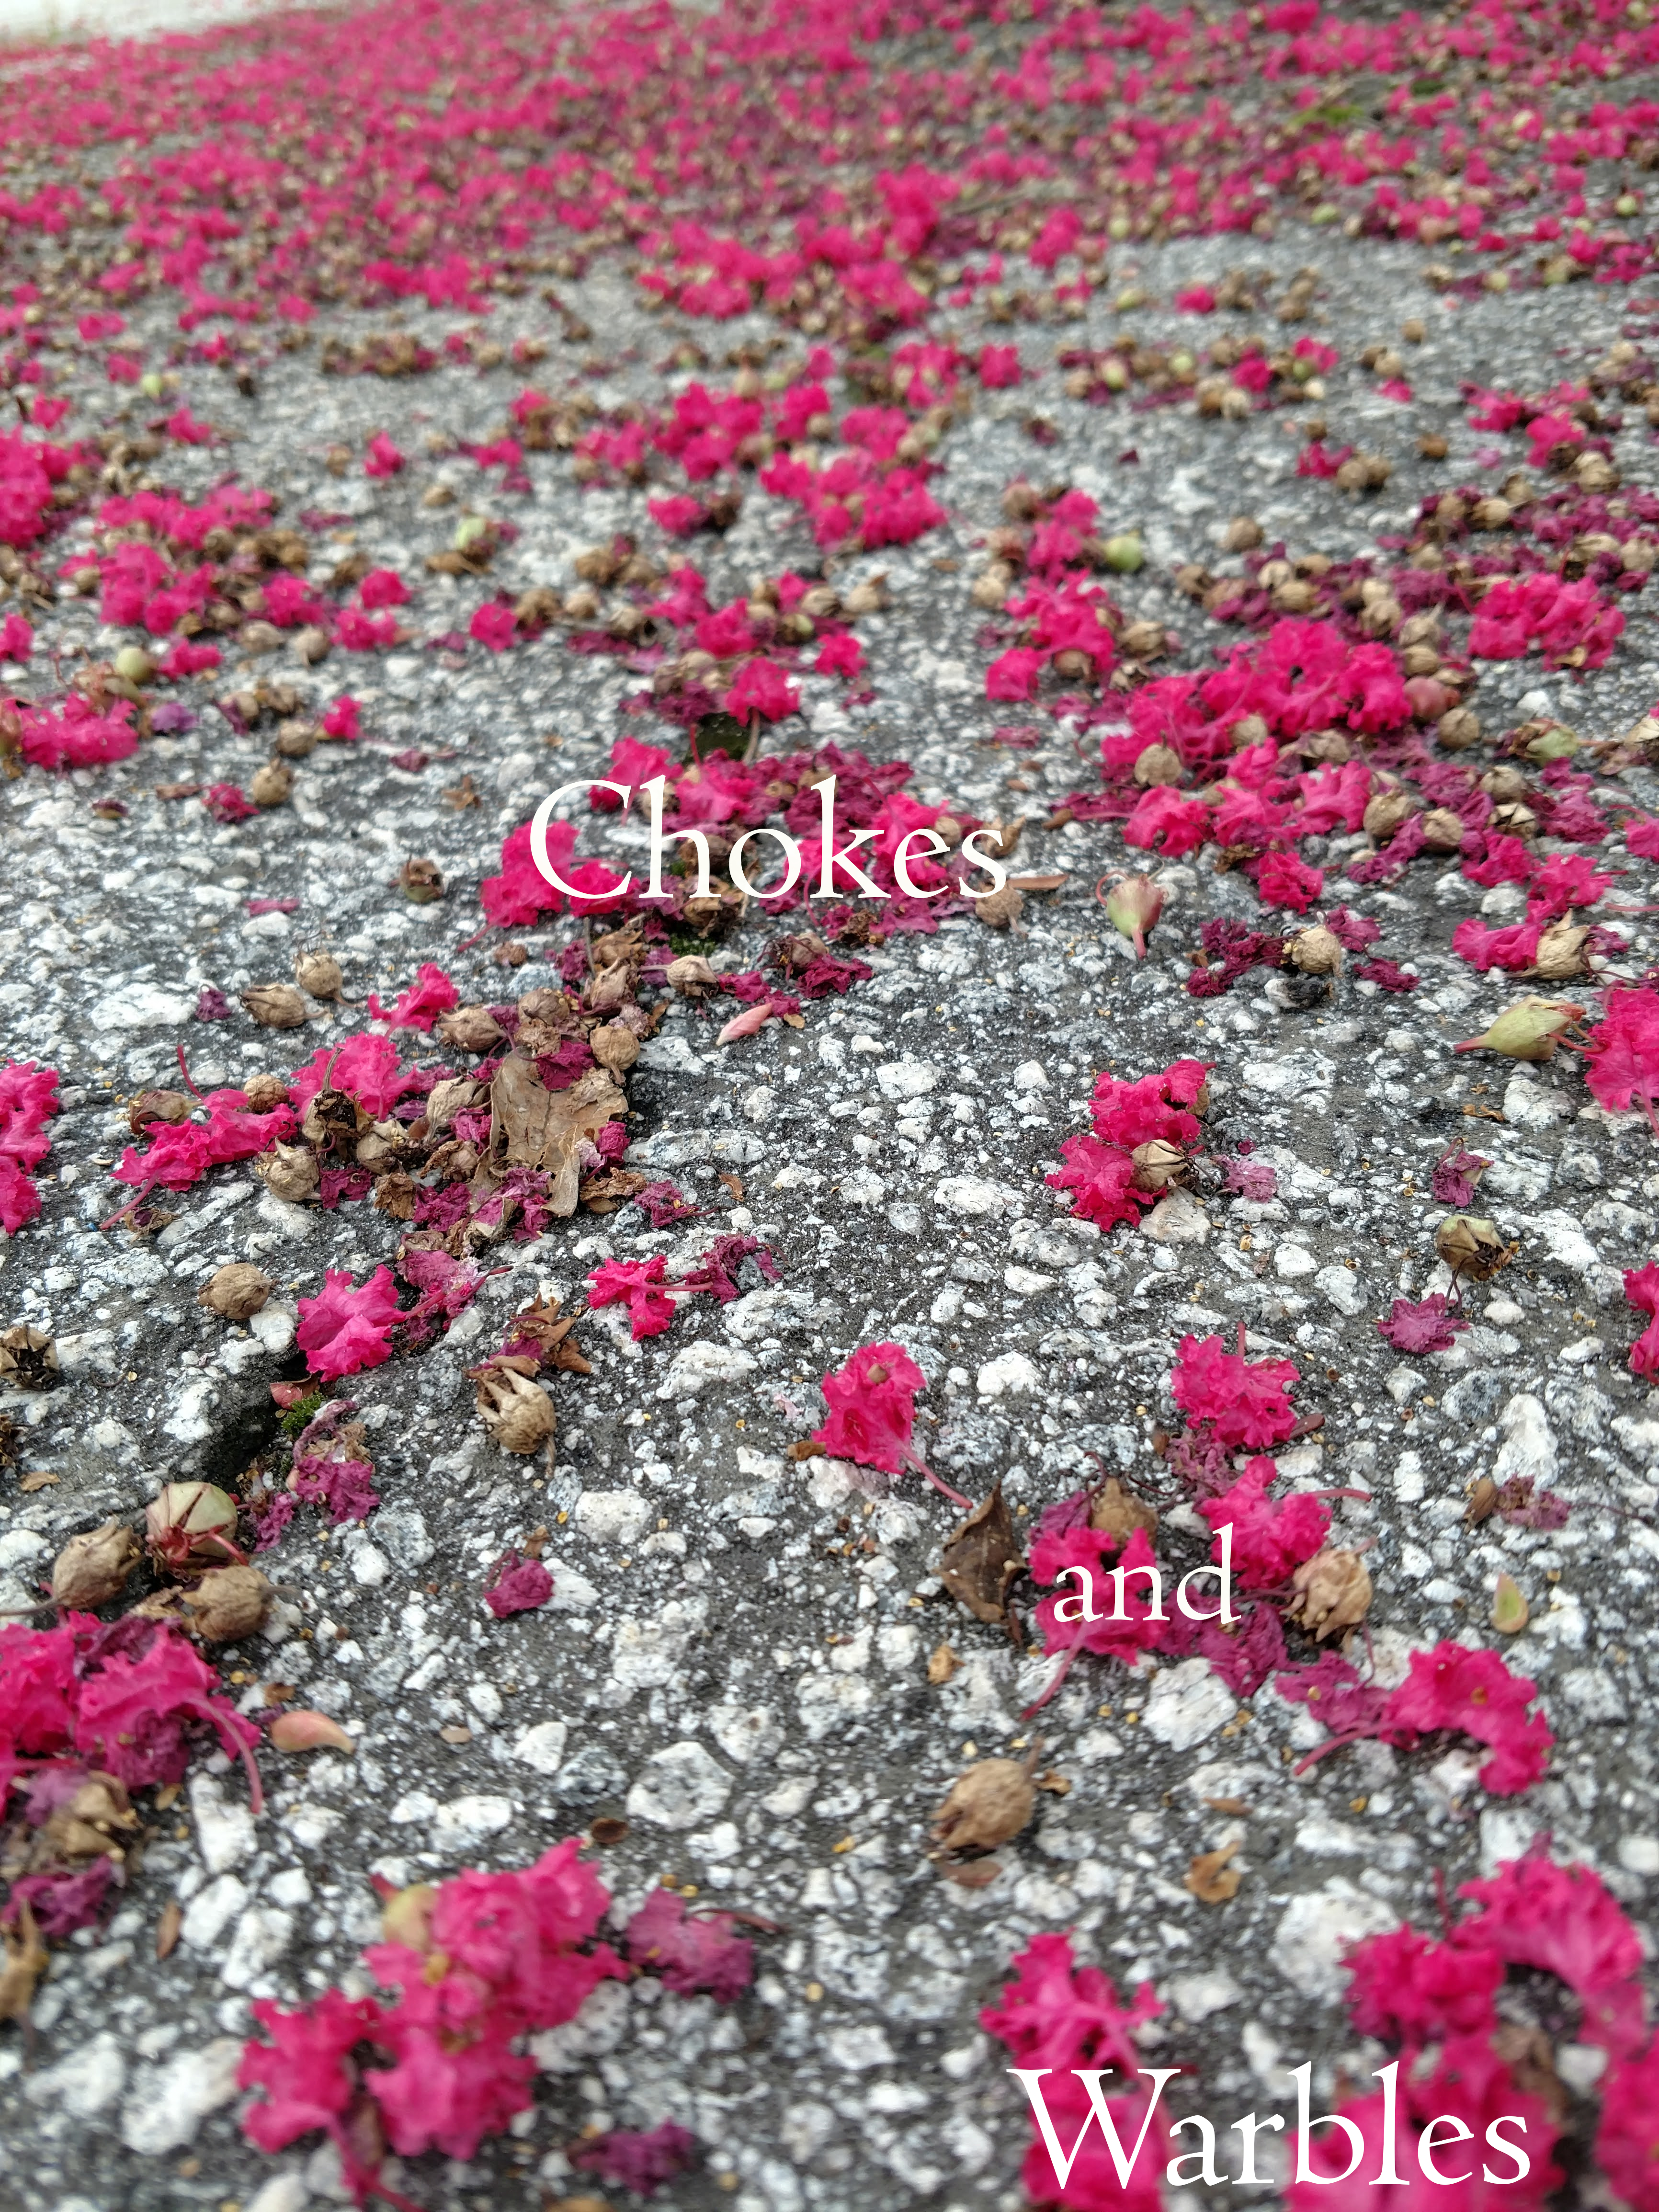 Chokes and Warbles, a poem by Michael Channing